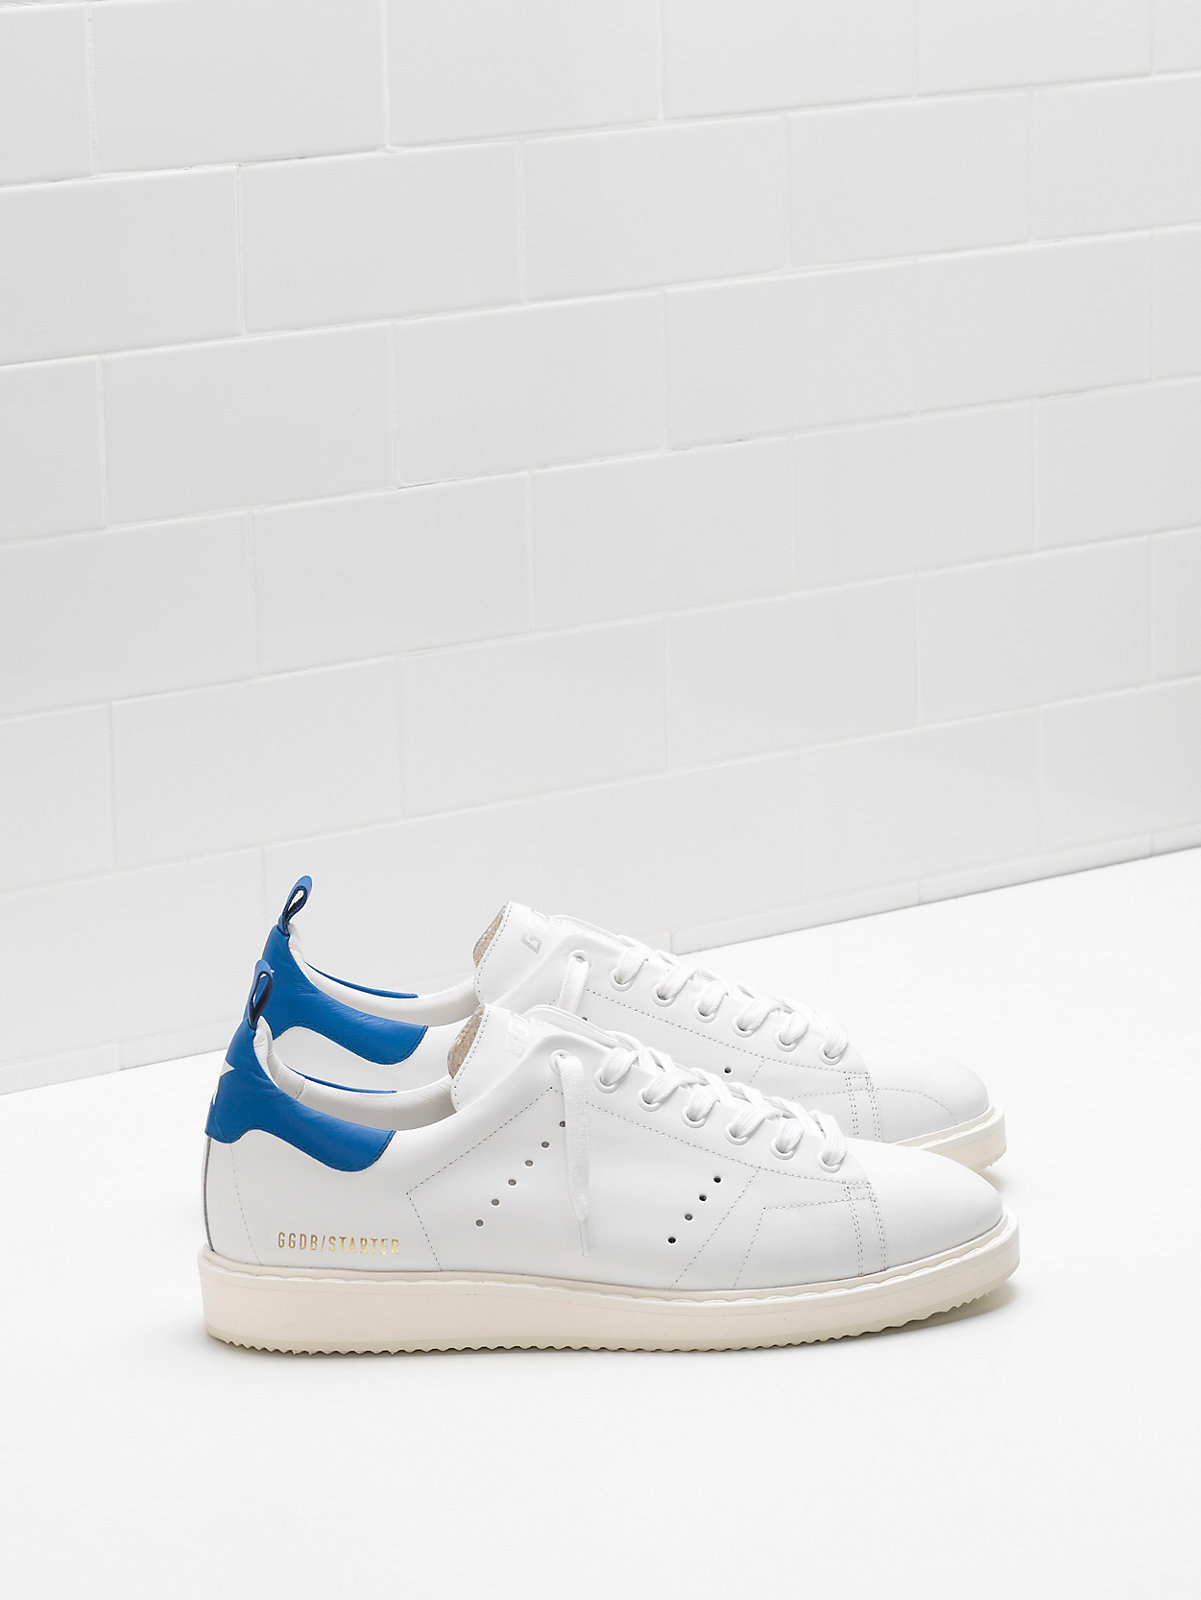 Golden Goose Sneaker Styles Without The 